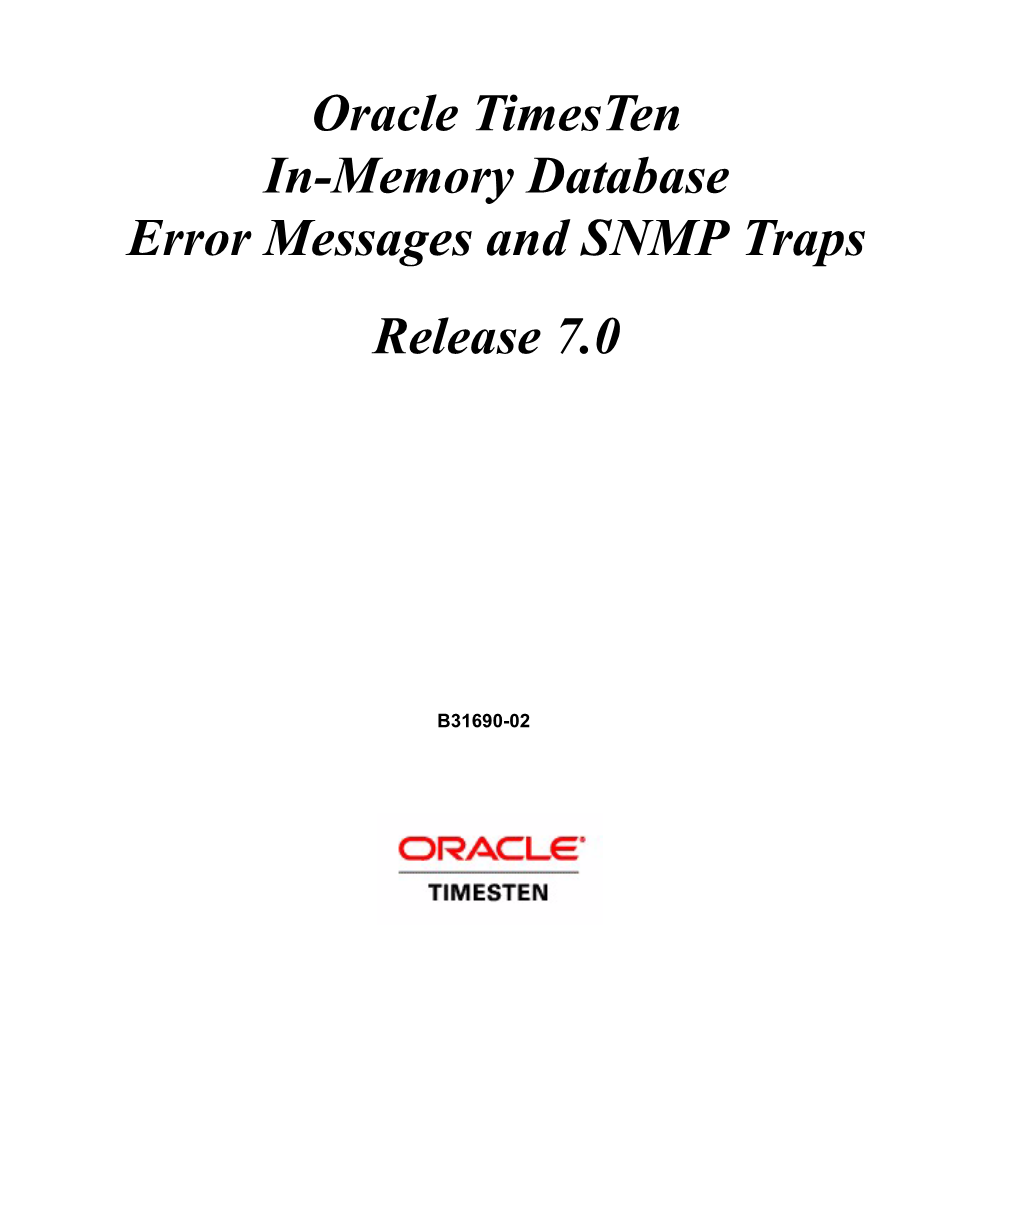 Oracle Timesten In-Memory Database Error Messages and SNMP Traps Release 7.0